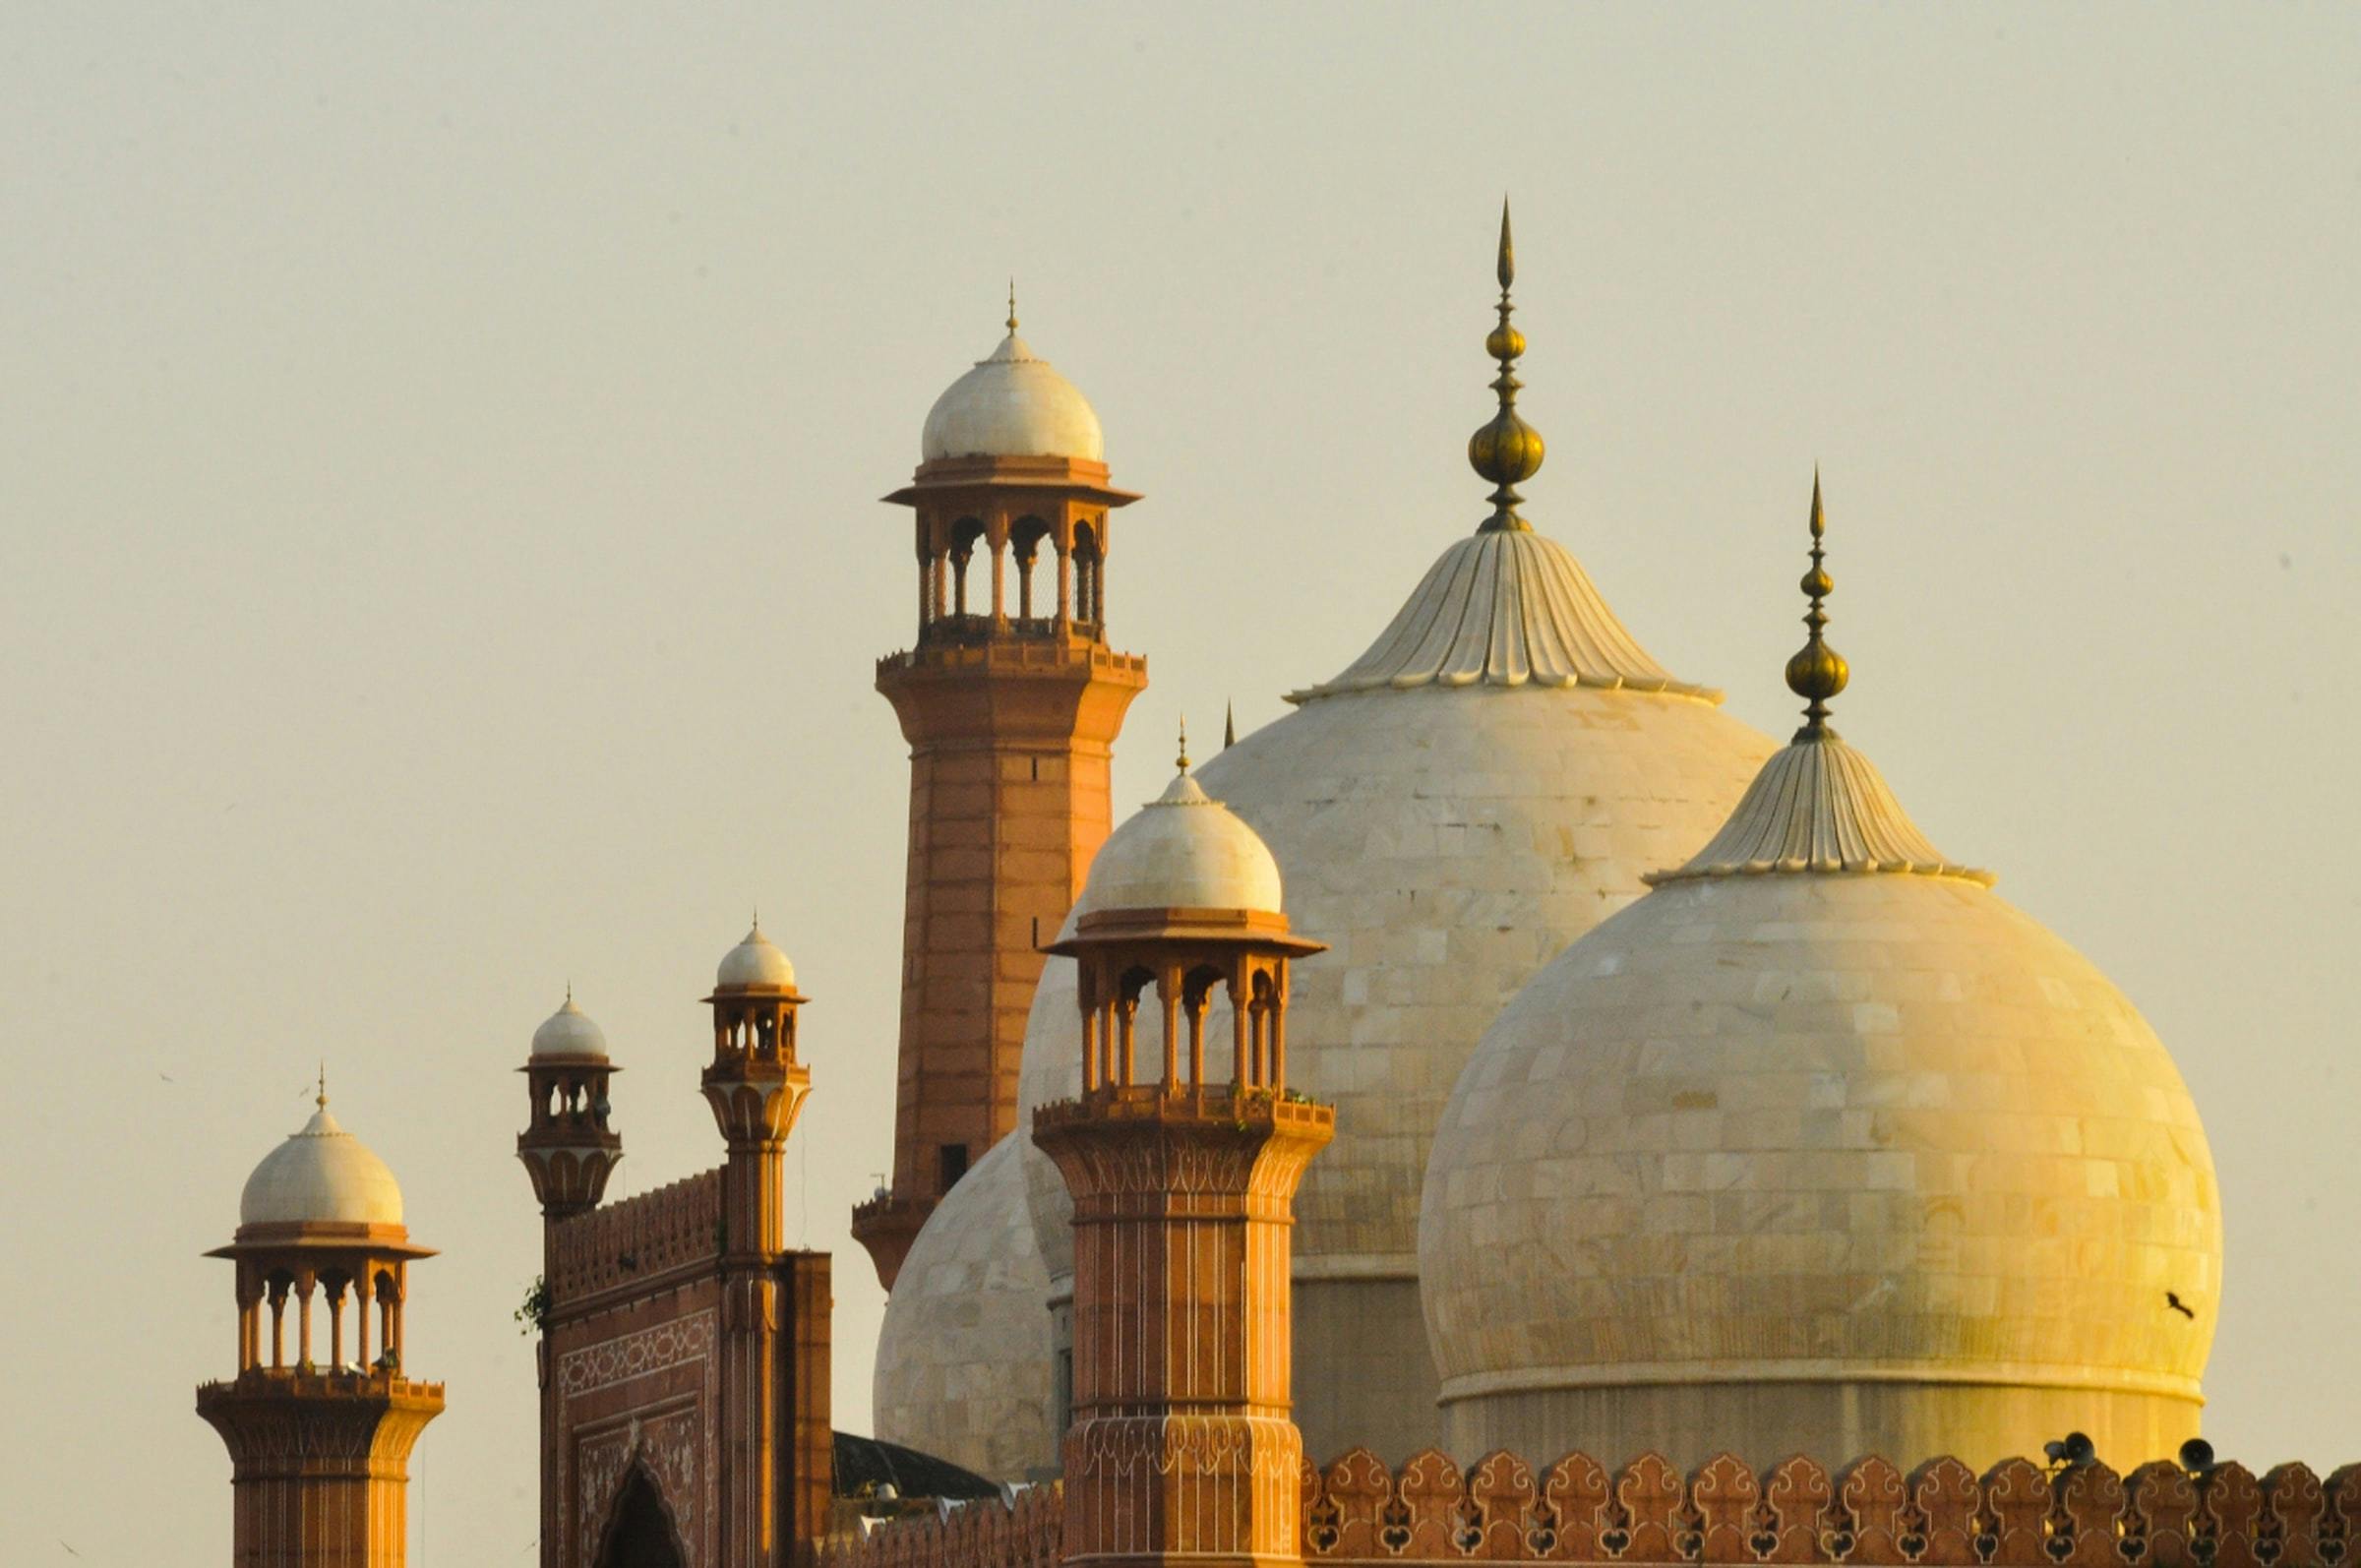 Domes of the 250-year-old Badshahi Mosque in Lahore City, Pakistan.